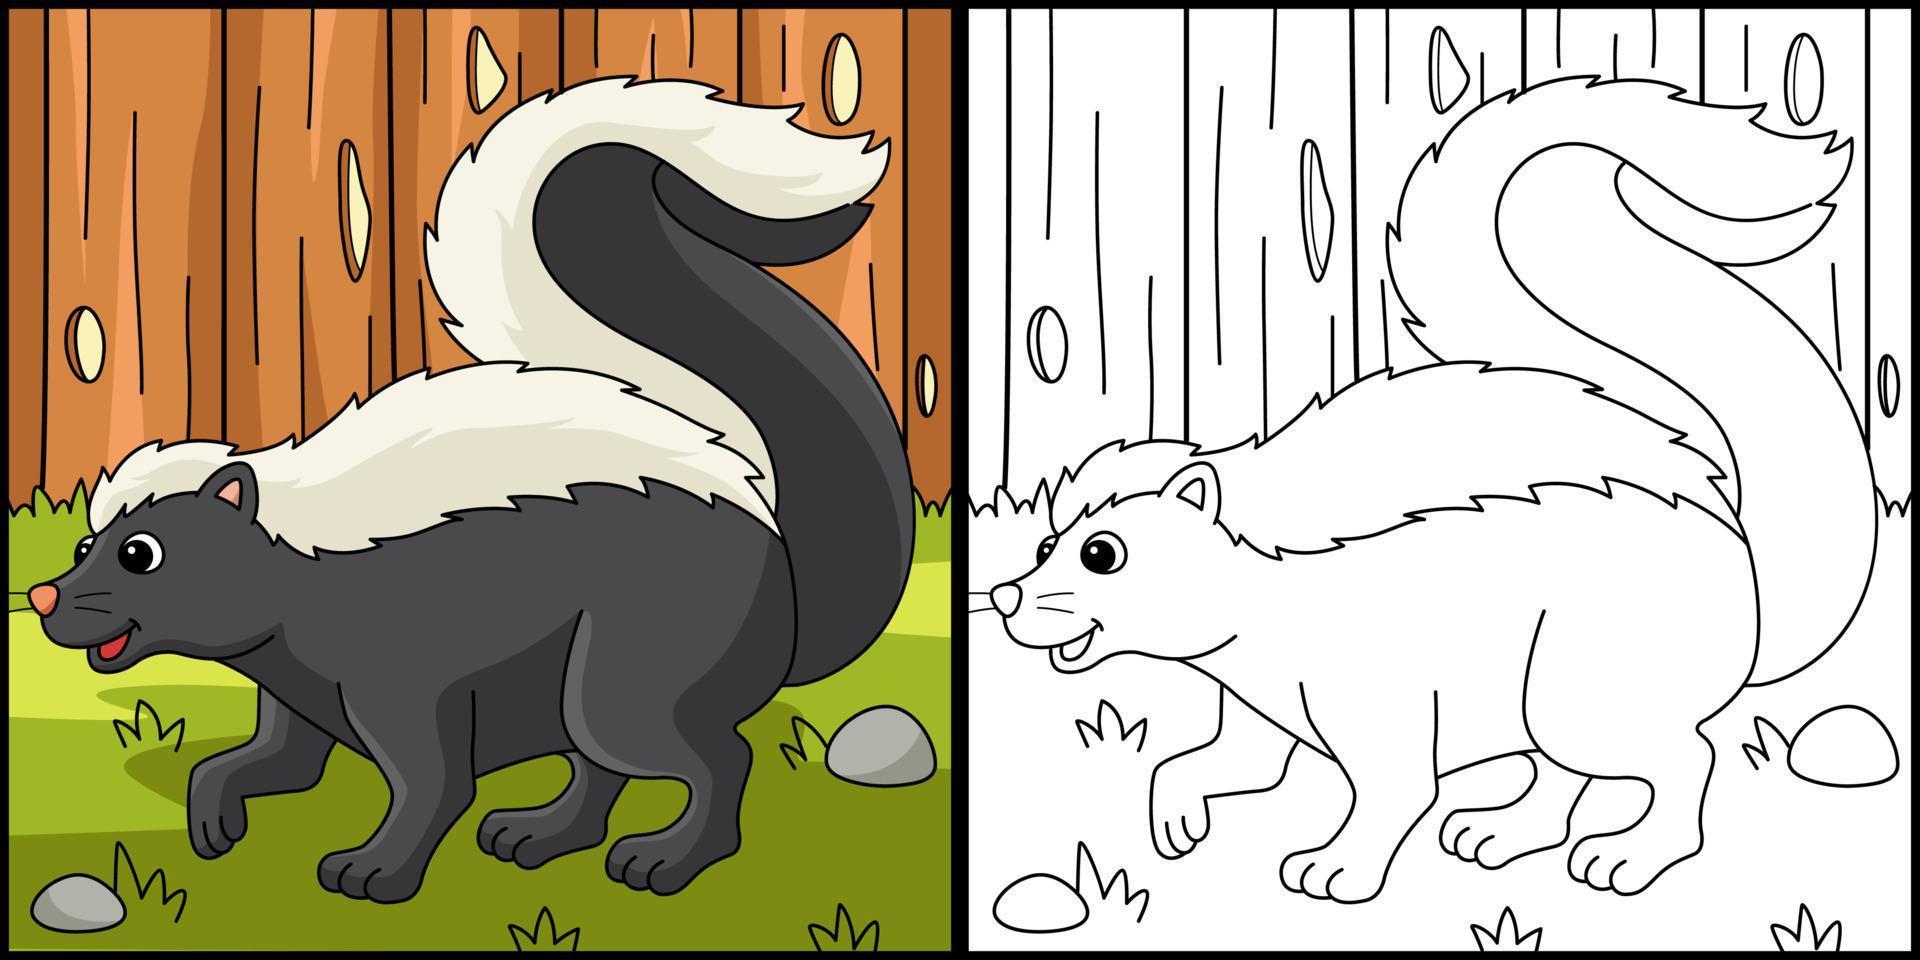 Skunk Animal Coloring Page Colored Illustration vector